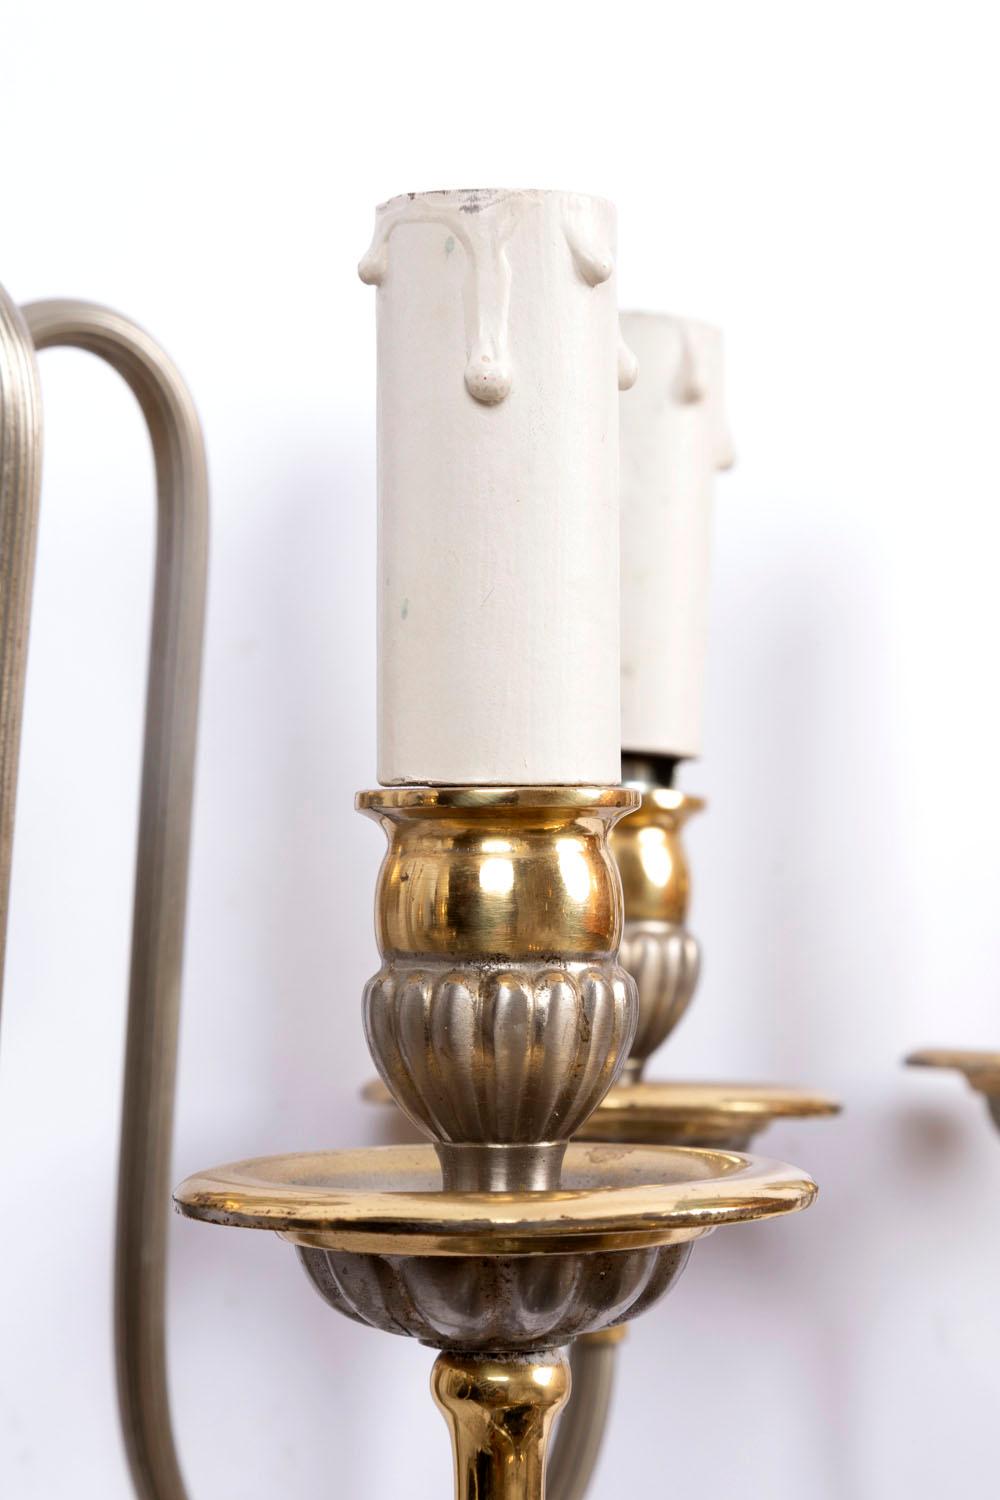 Maison Jansen, Pair of Directoire Style Wall Sconces Gilt and Silver Brass 1970s For Sale 5